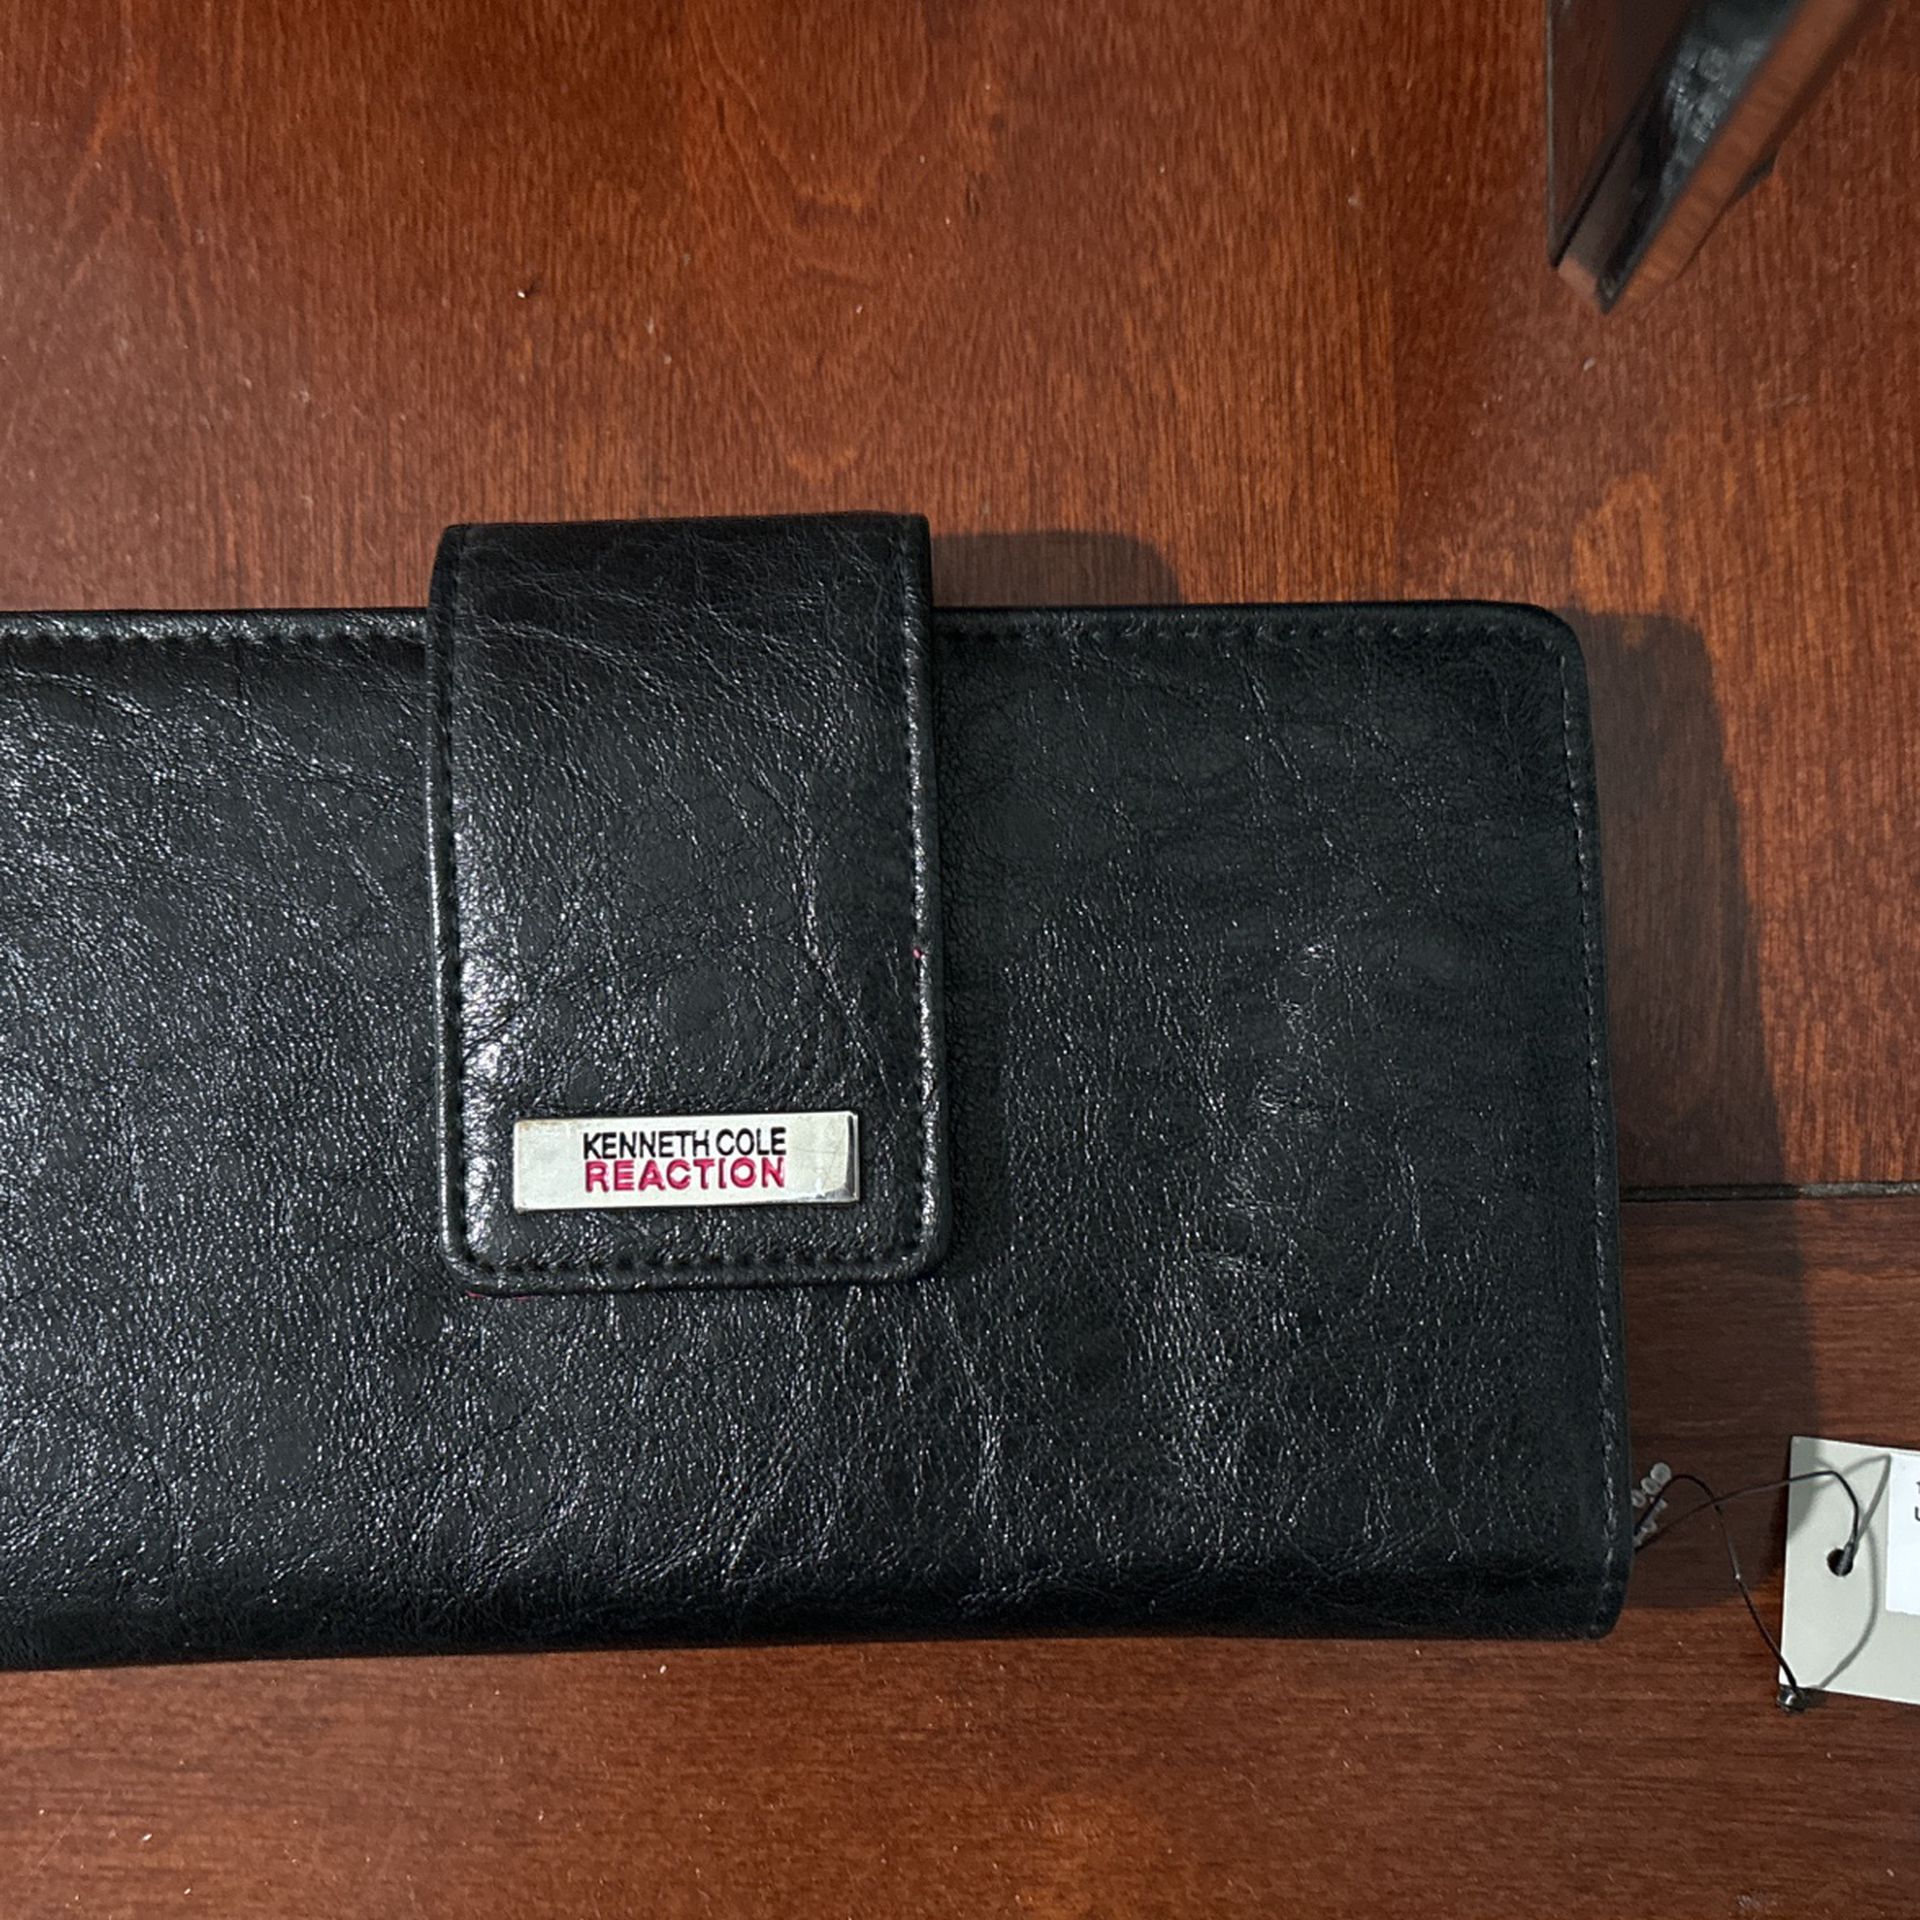 Ladies Wallet- KENNETH  COLE REACTION- $8